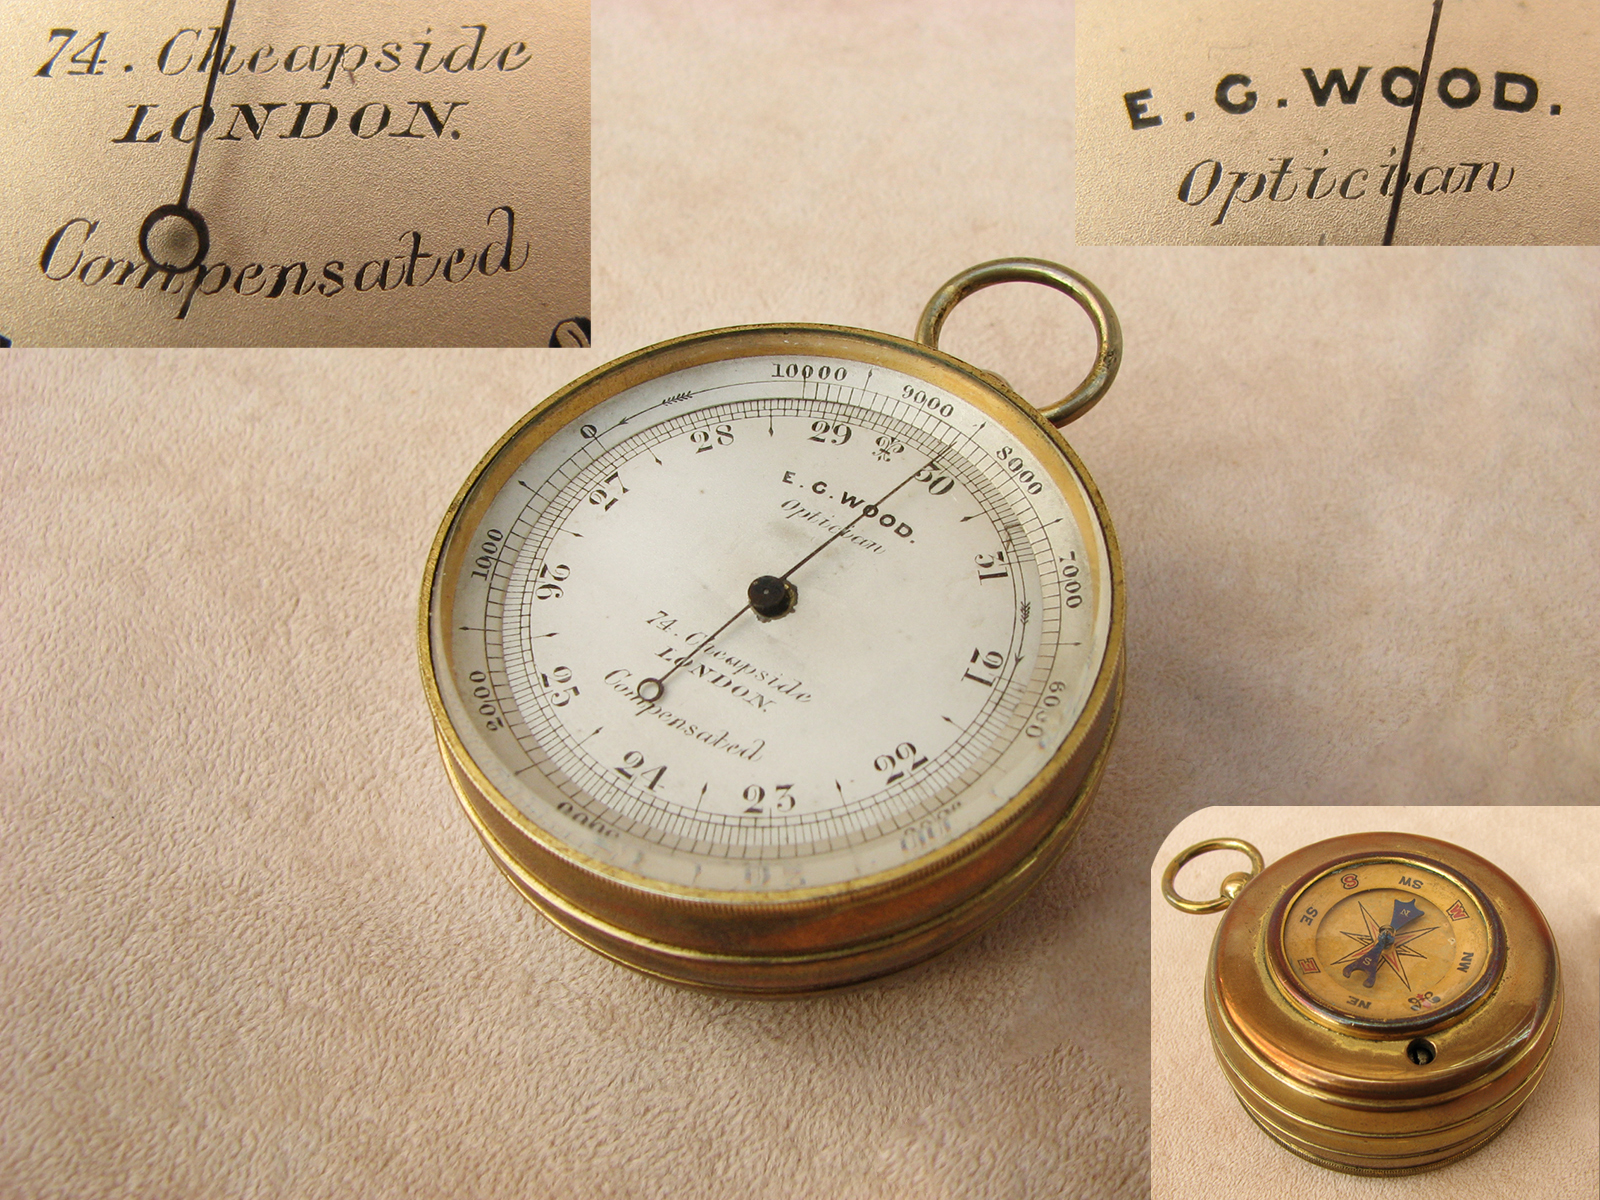 E.G. Wood 19th century pocket barometer and compass combination